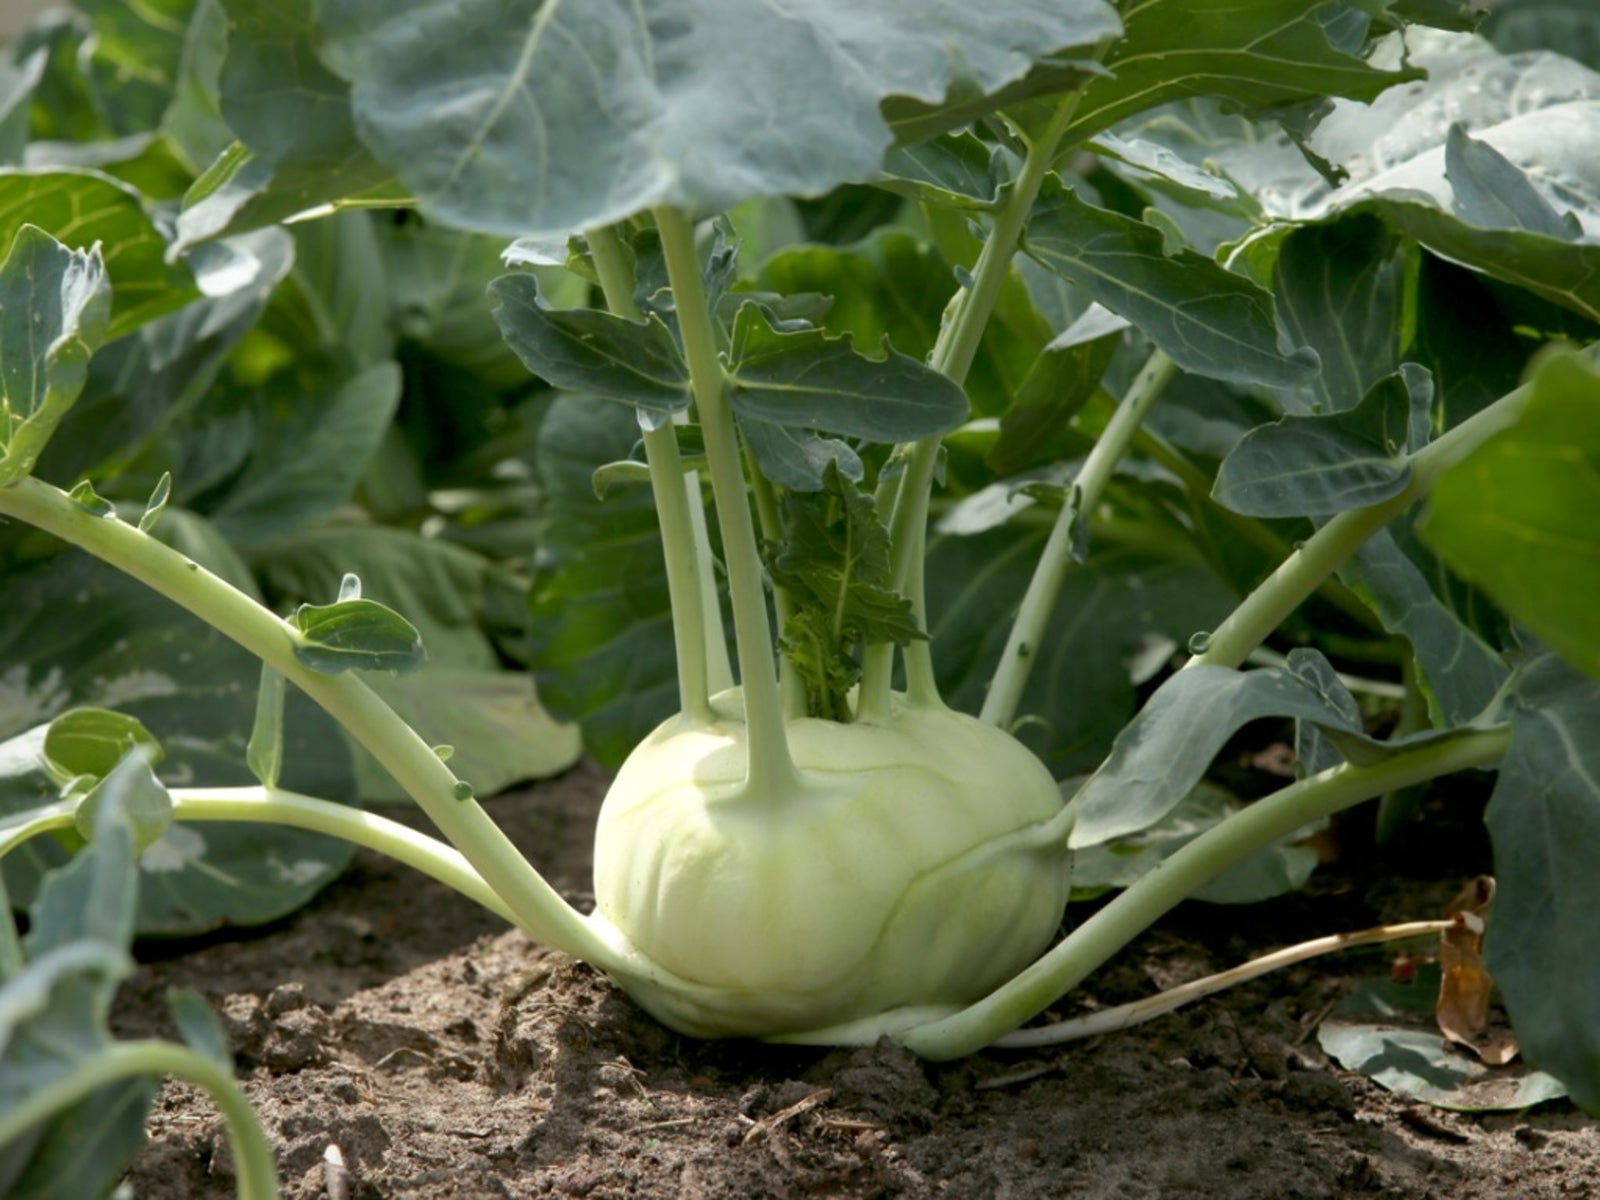 Learn How In Grow Know | Garden How The Kohlrabi Gardening To